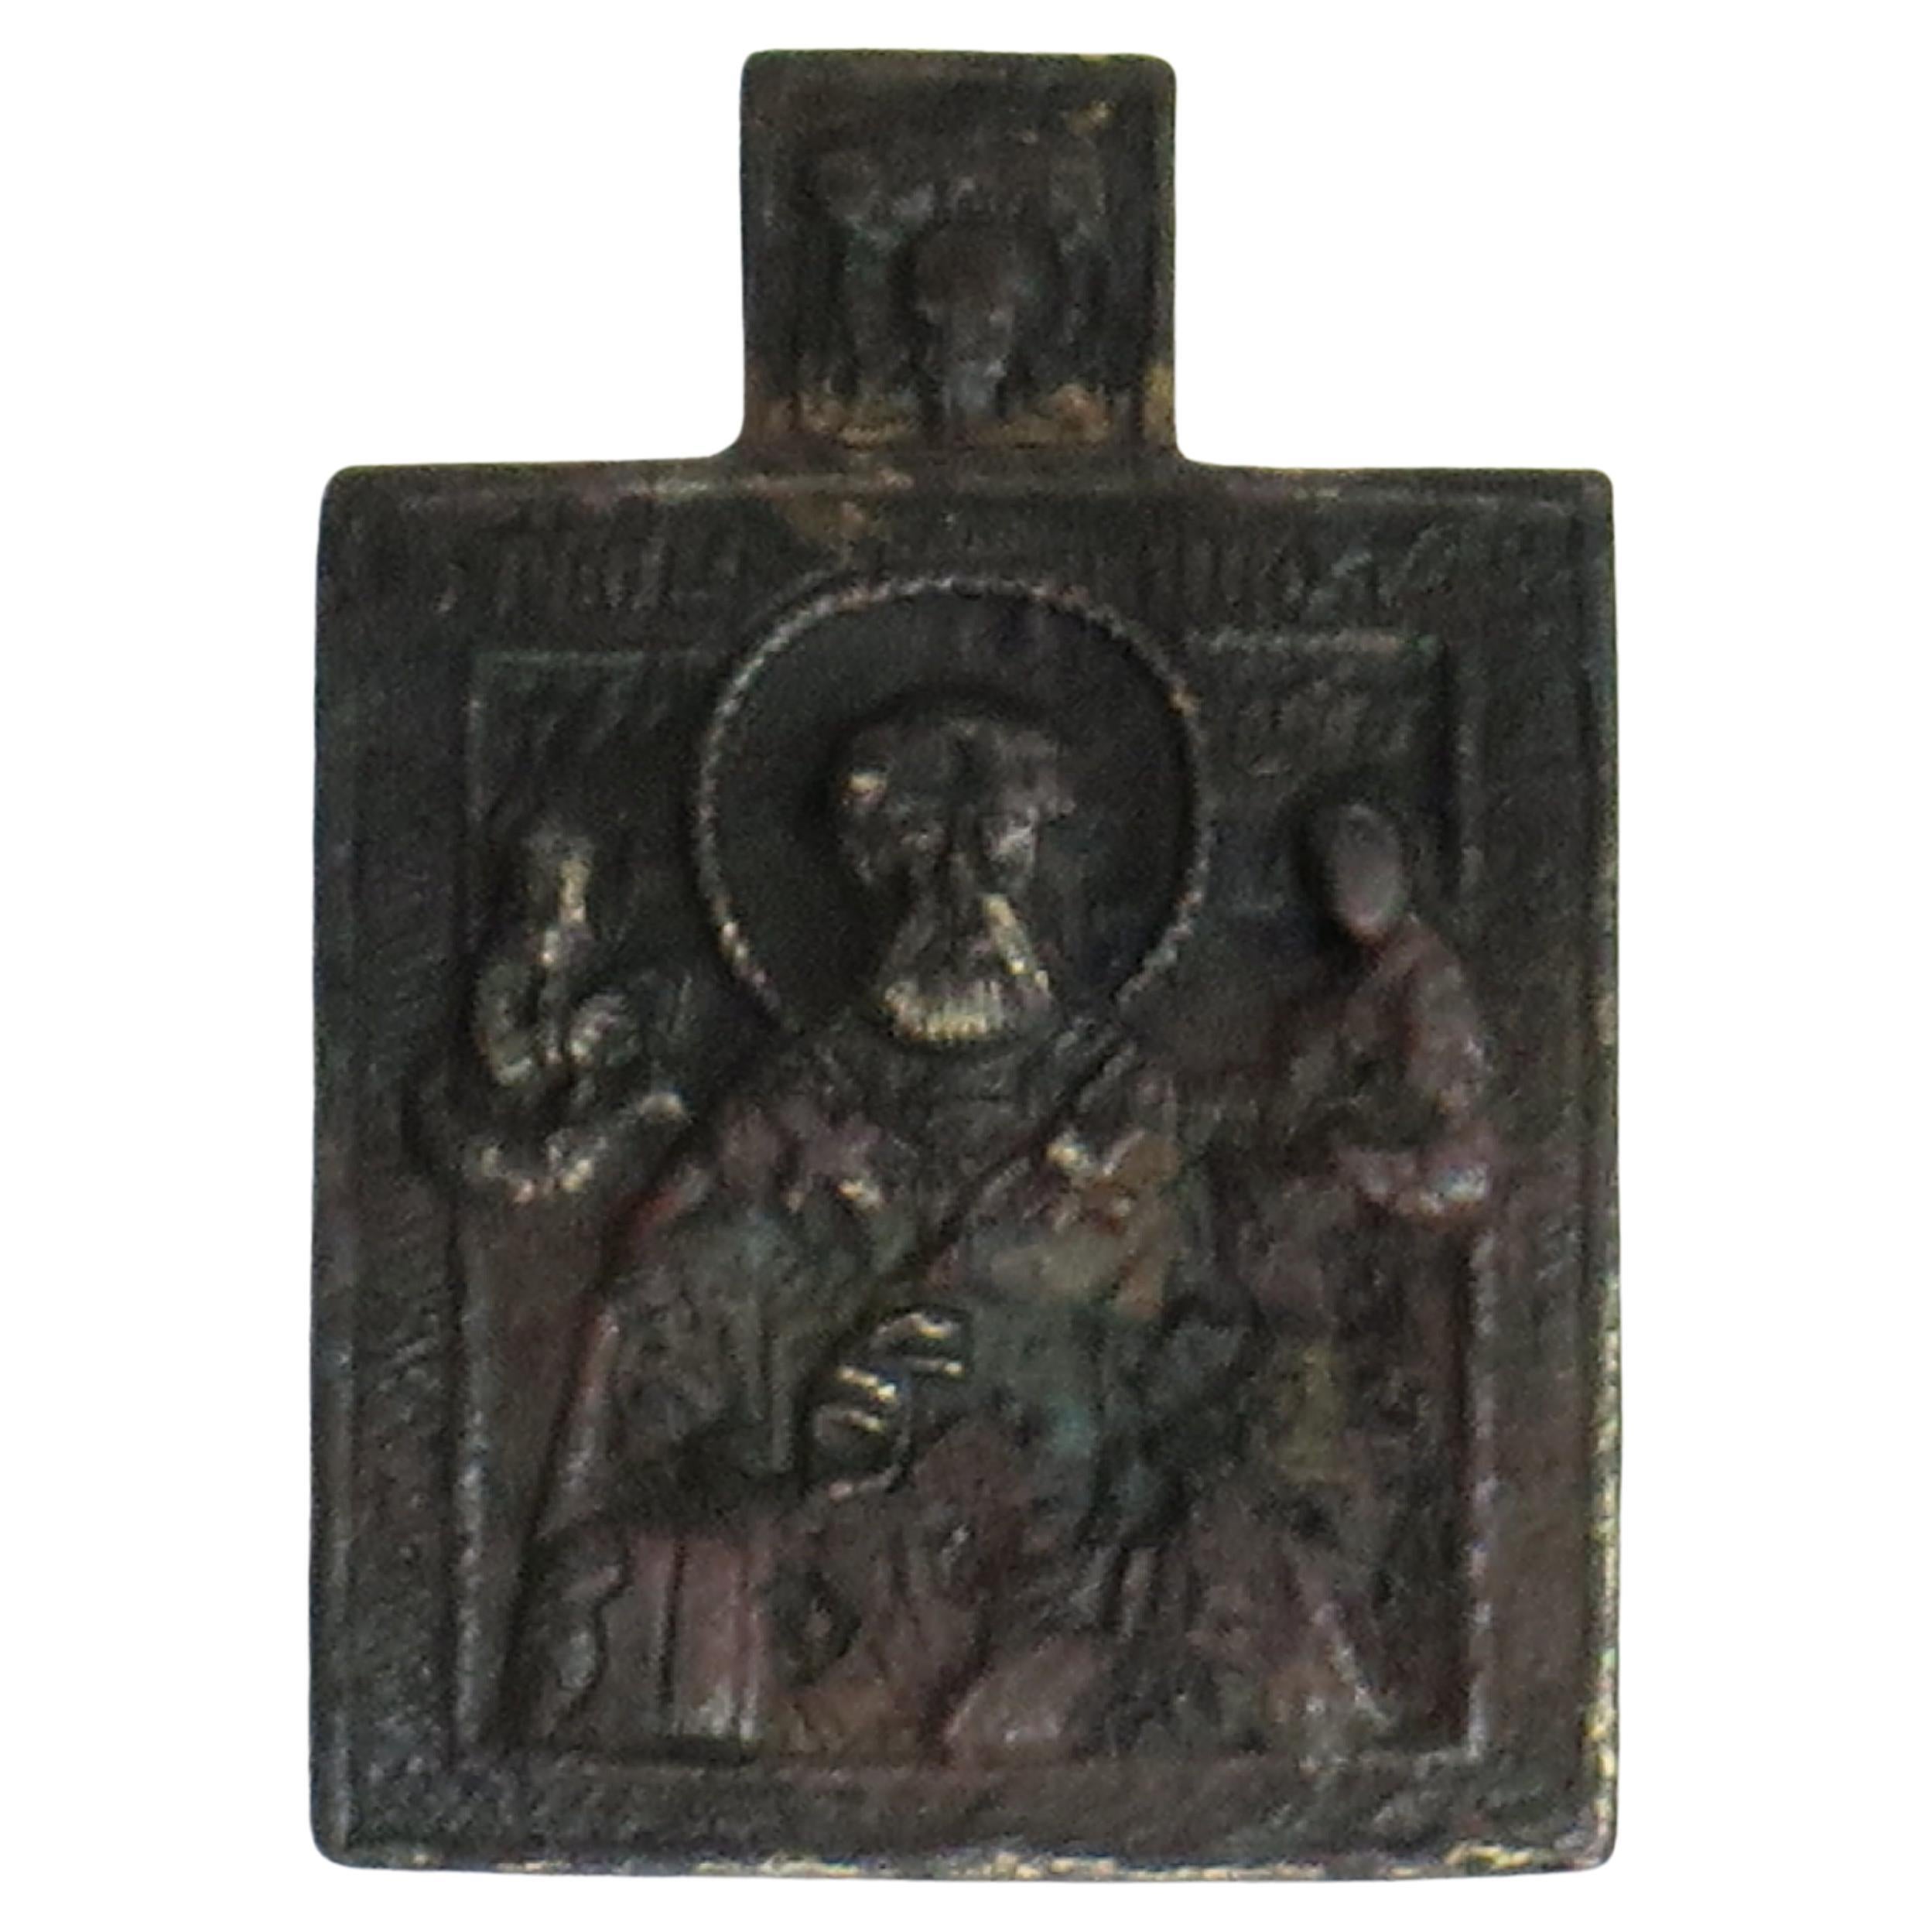 Early antique Russian Travelling Icon in bronze, 18th Century or earlier